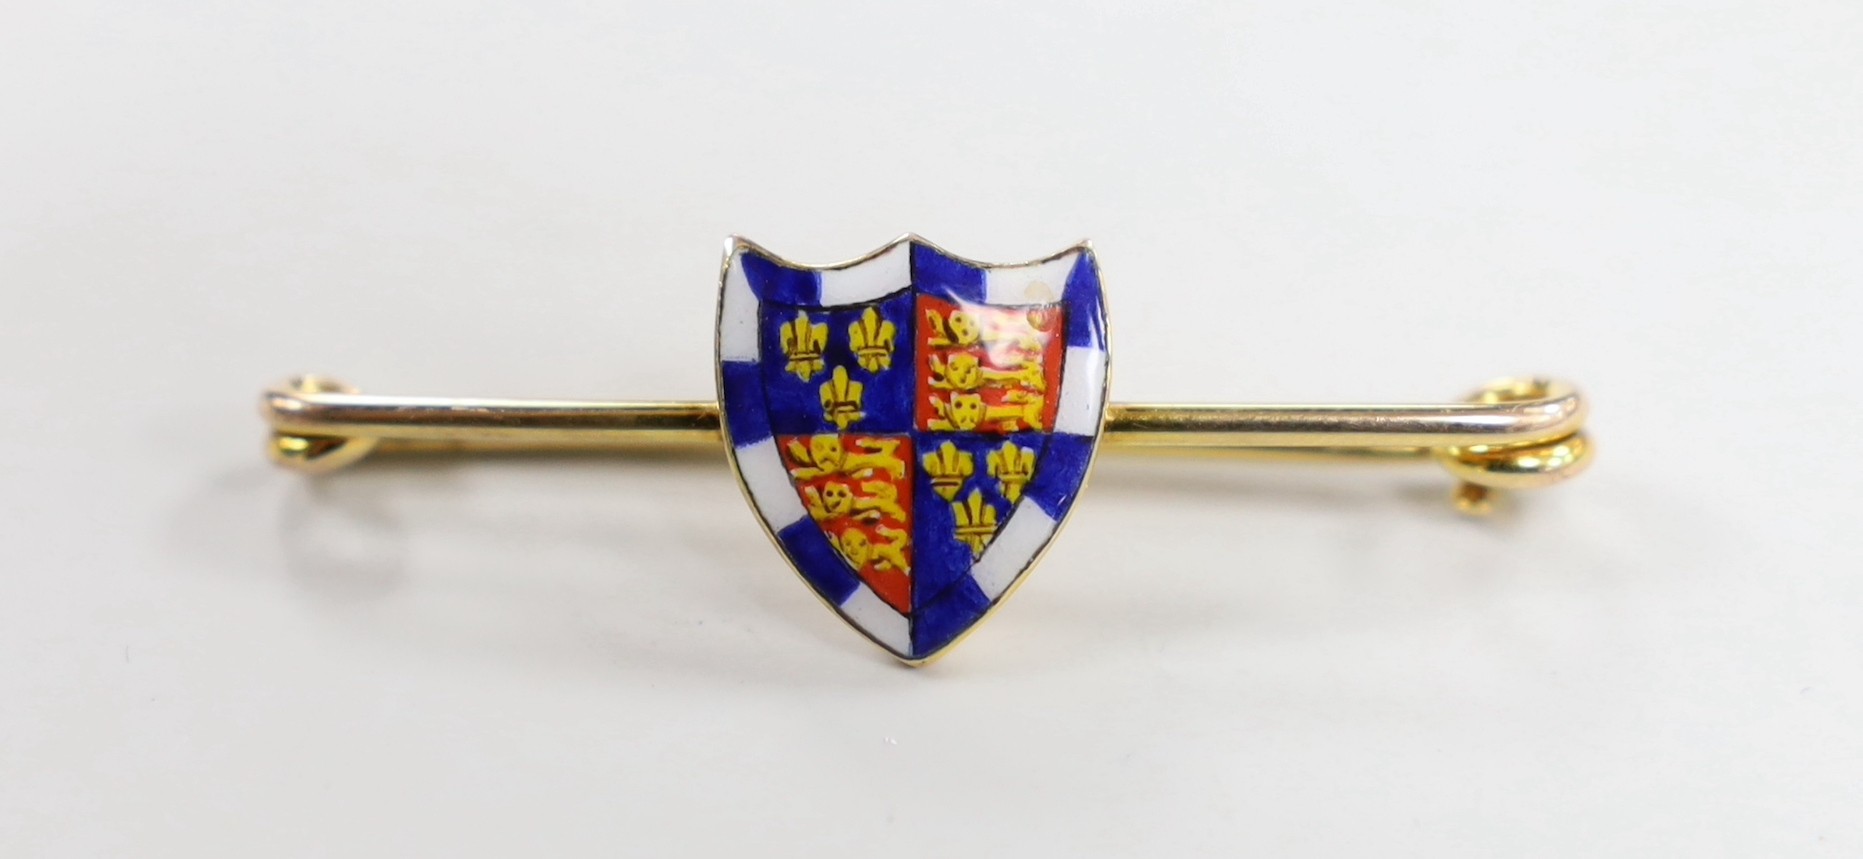 An early 20th century 9ct and polychrome enamel shield bar brooch, depicting the Royal Arms of England, 41mm, gross weight 2.9 grams.